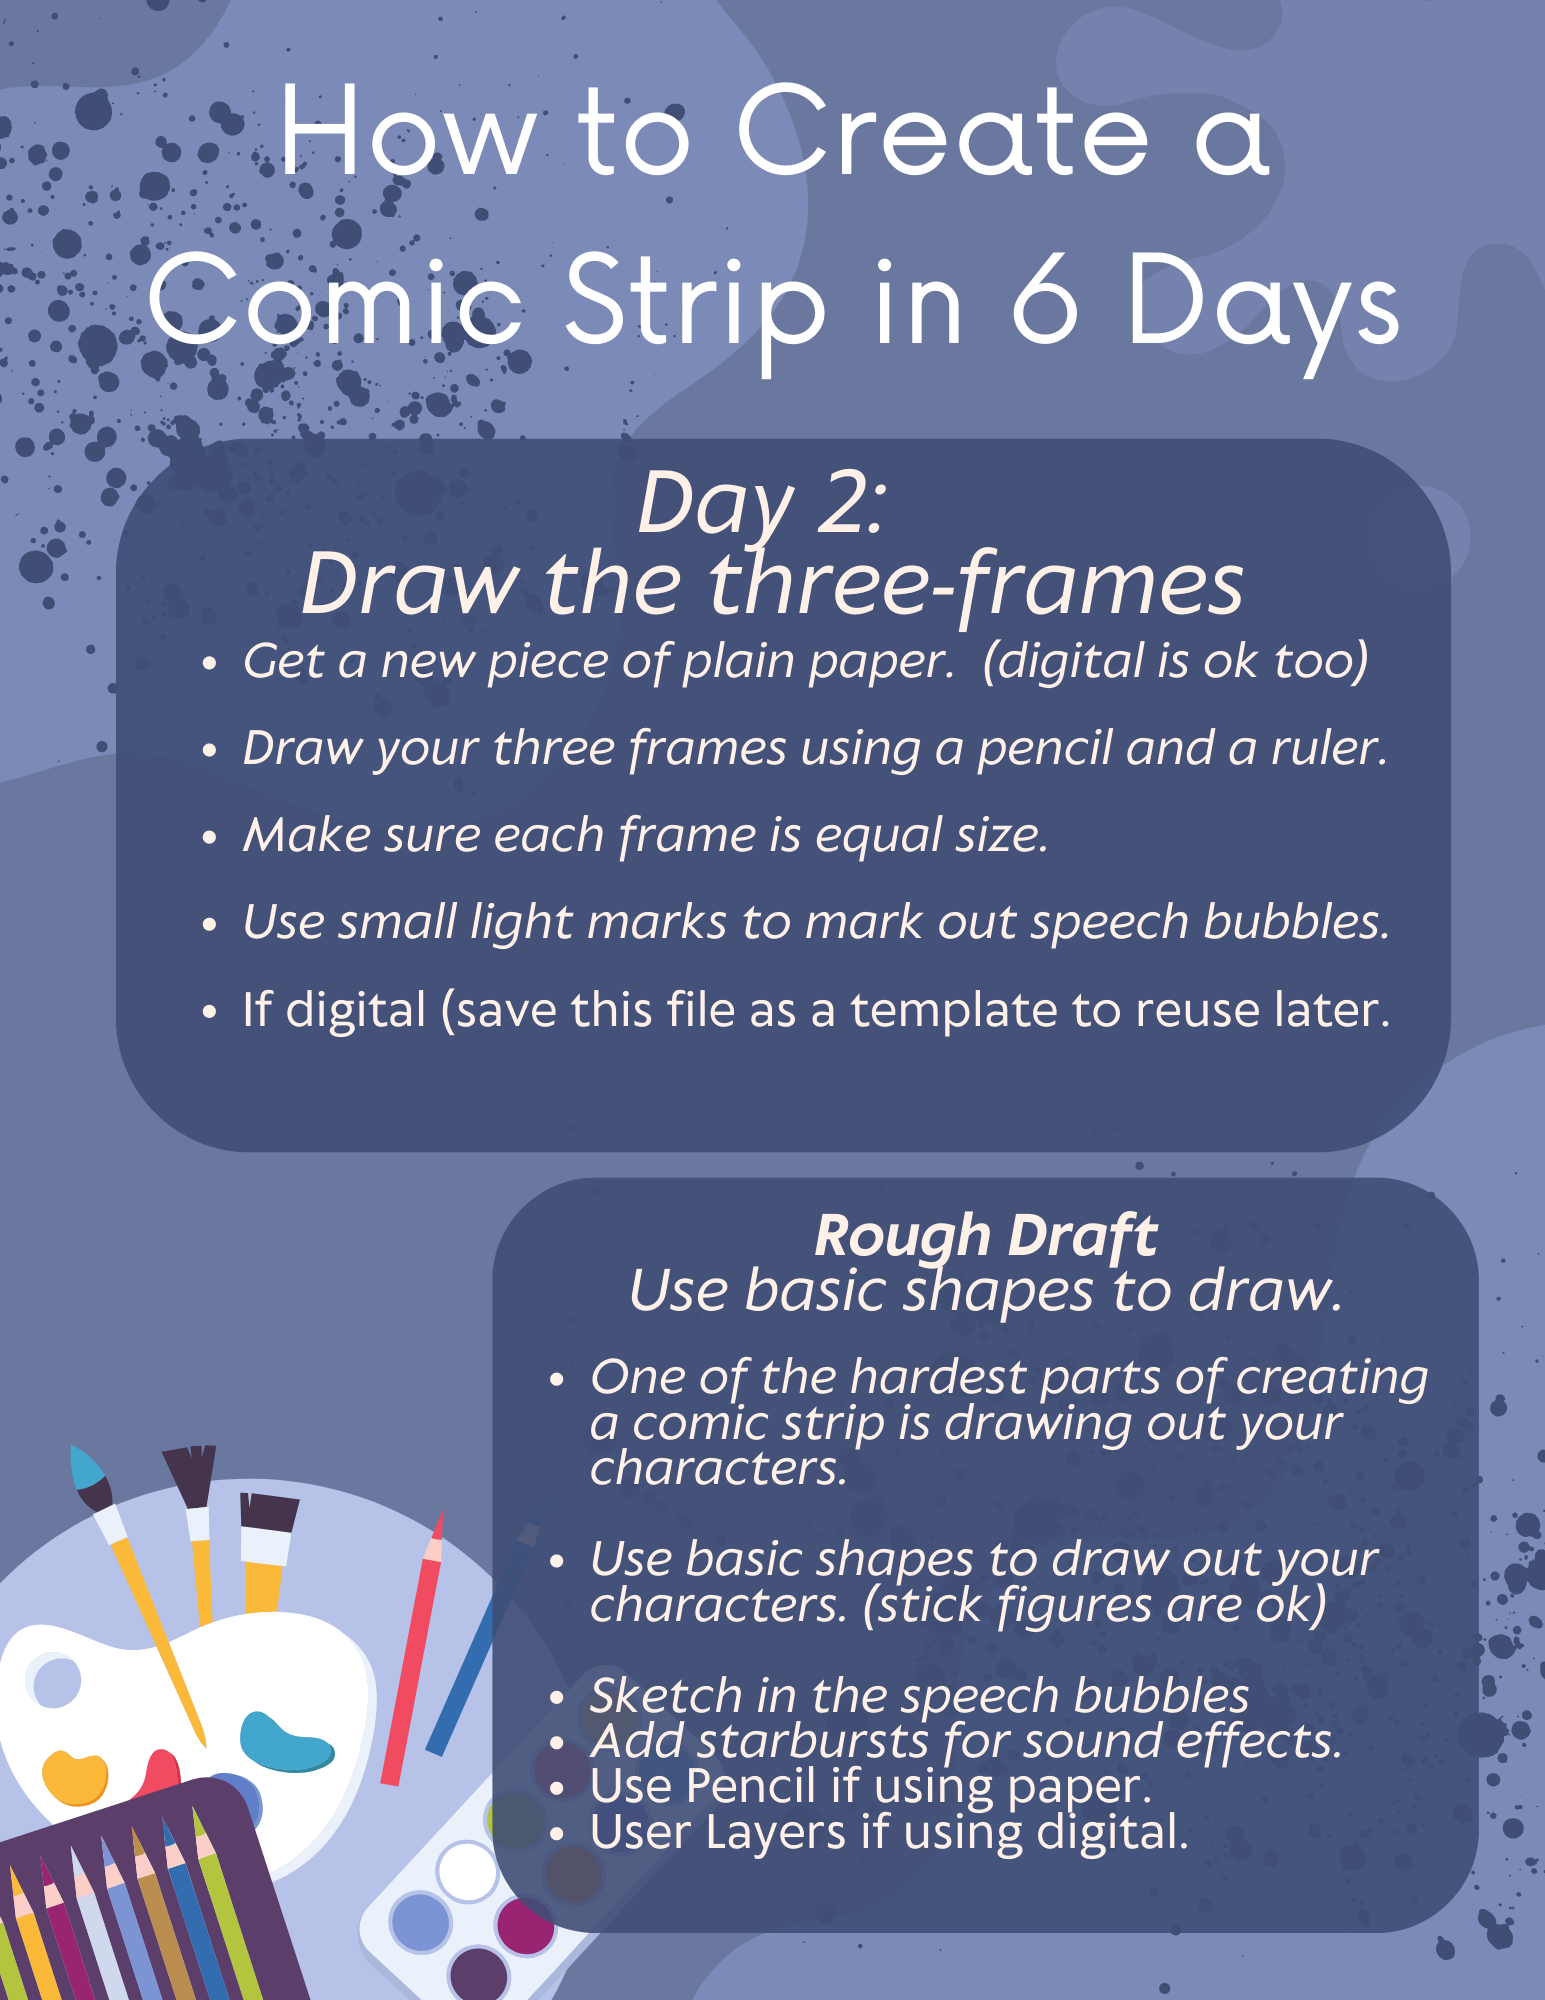 How to make a comic in 6 days – Day 2